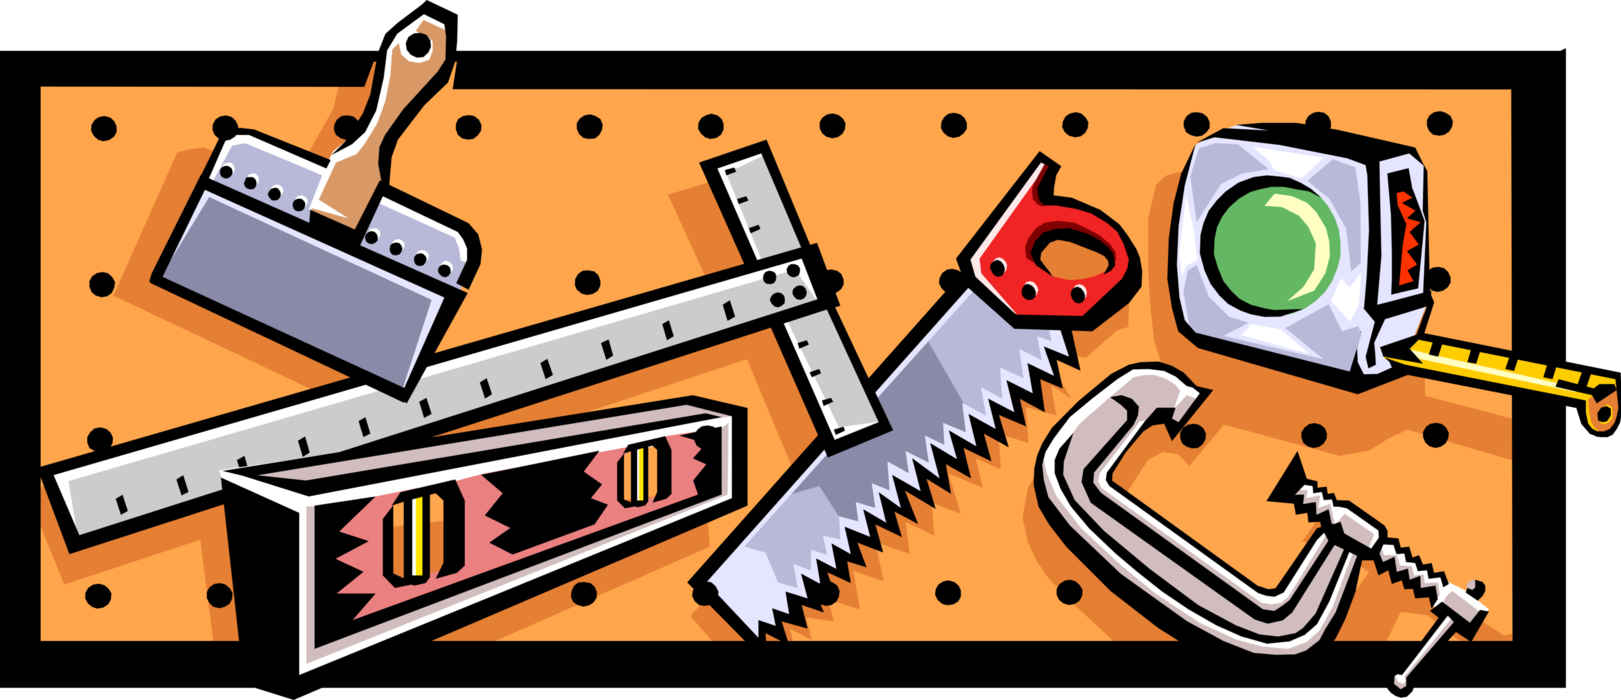 Vector Illustration of Workbench Tools Hanging on Pegboard